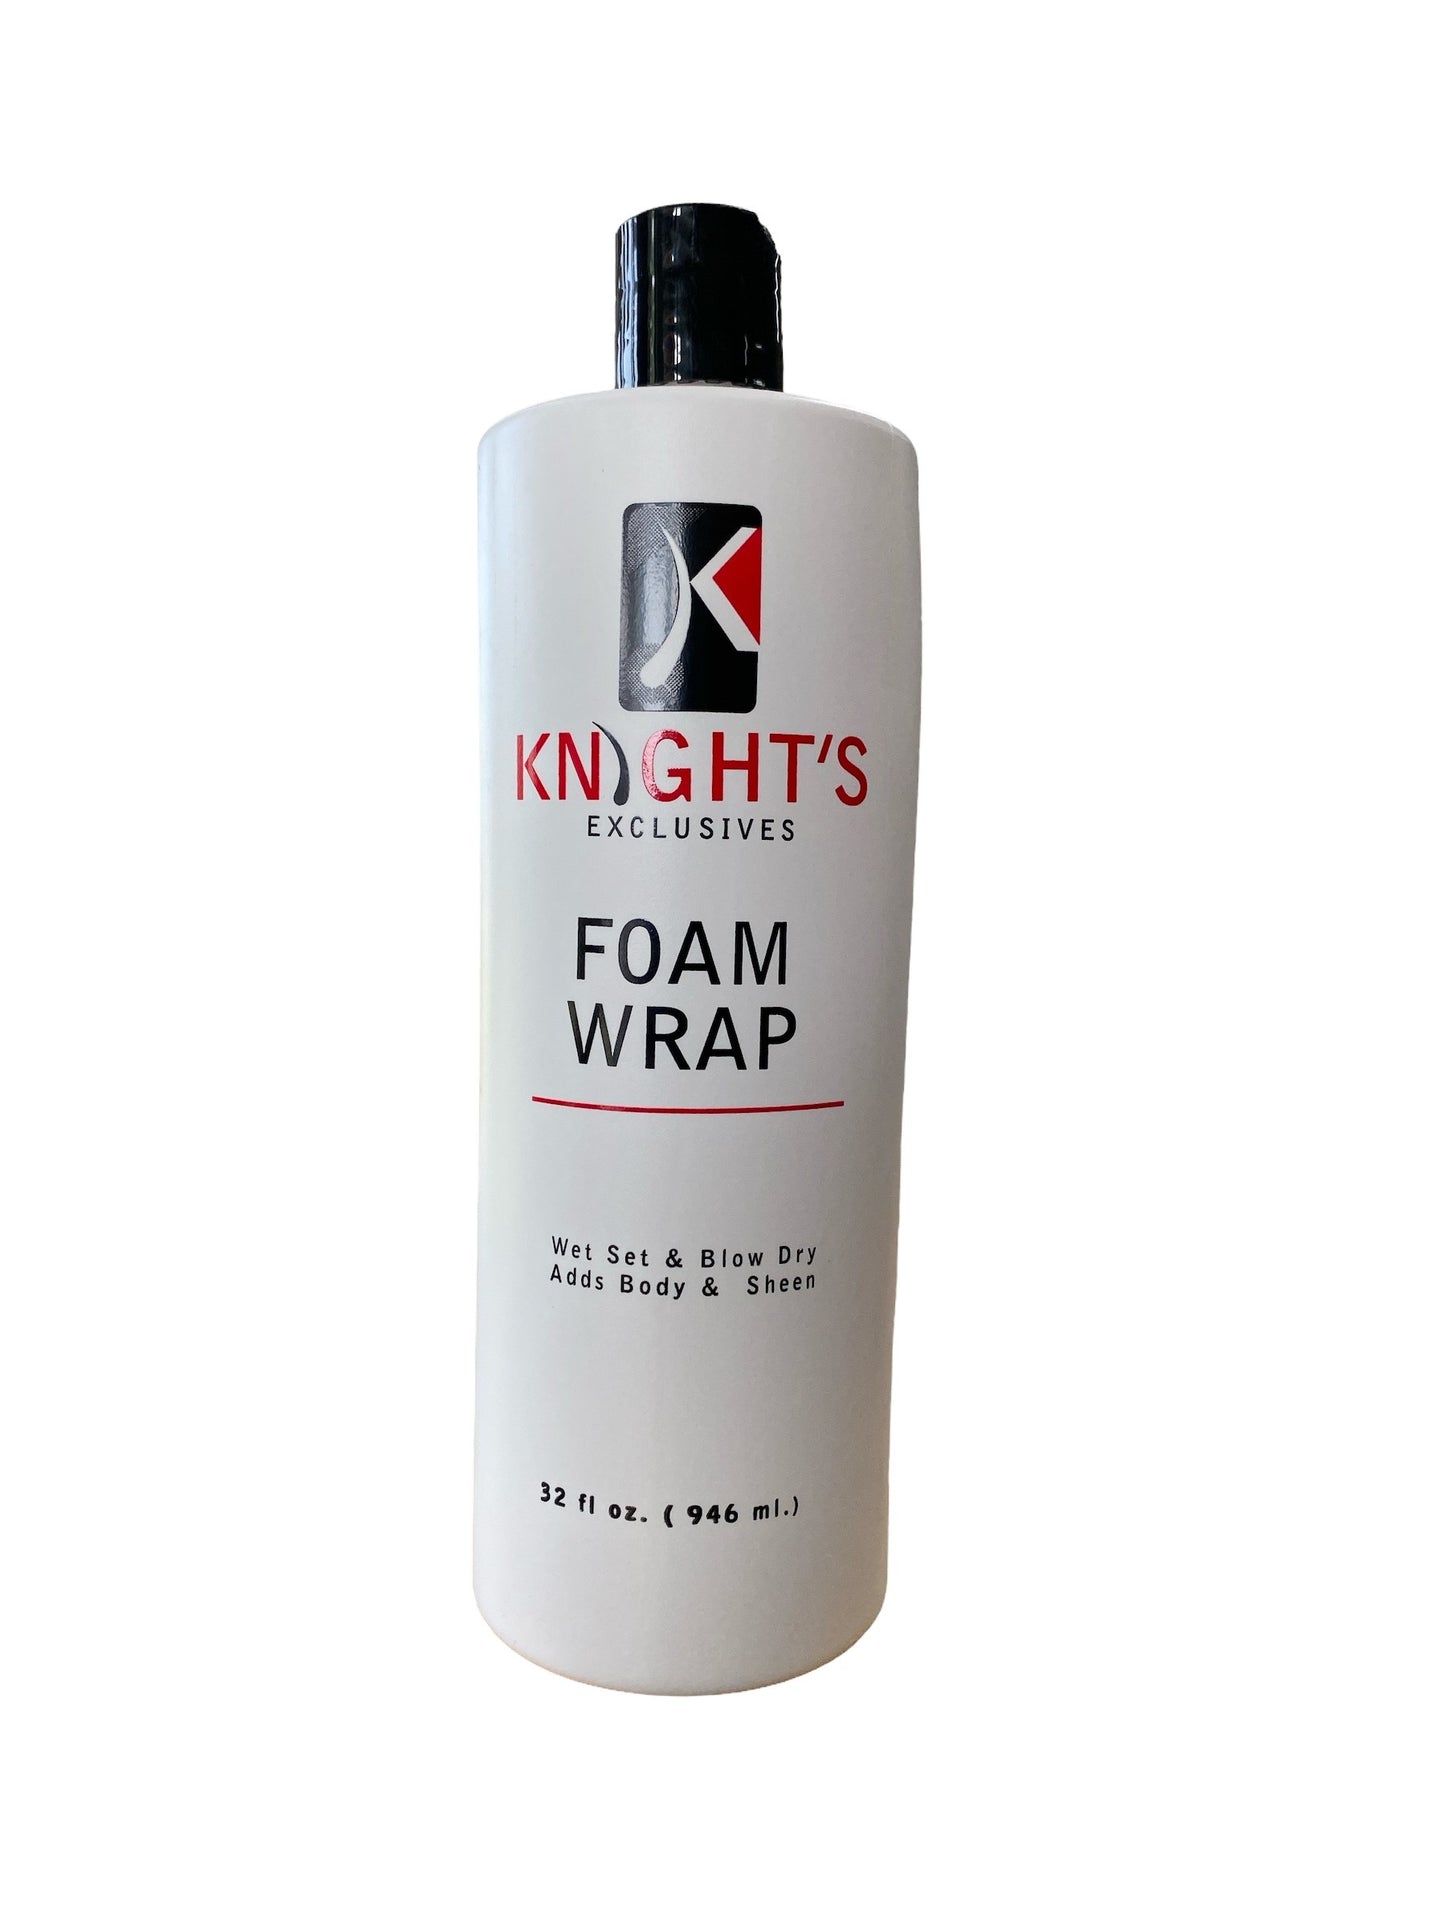 Knights Exclusives Foam Wrap Soft Hold